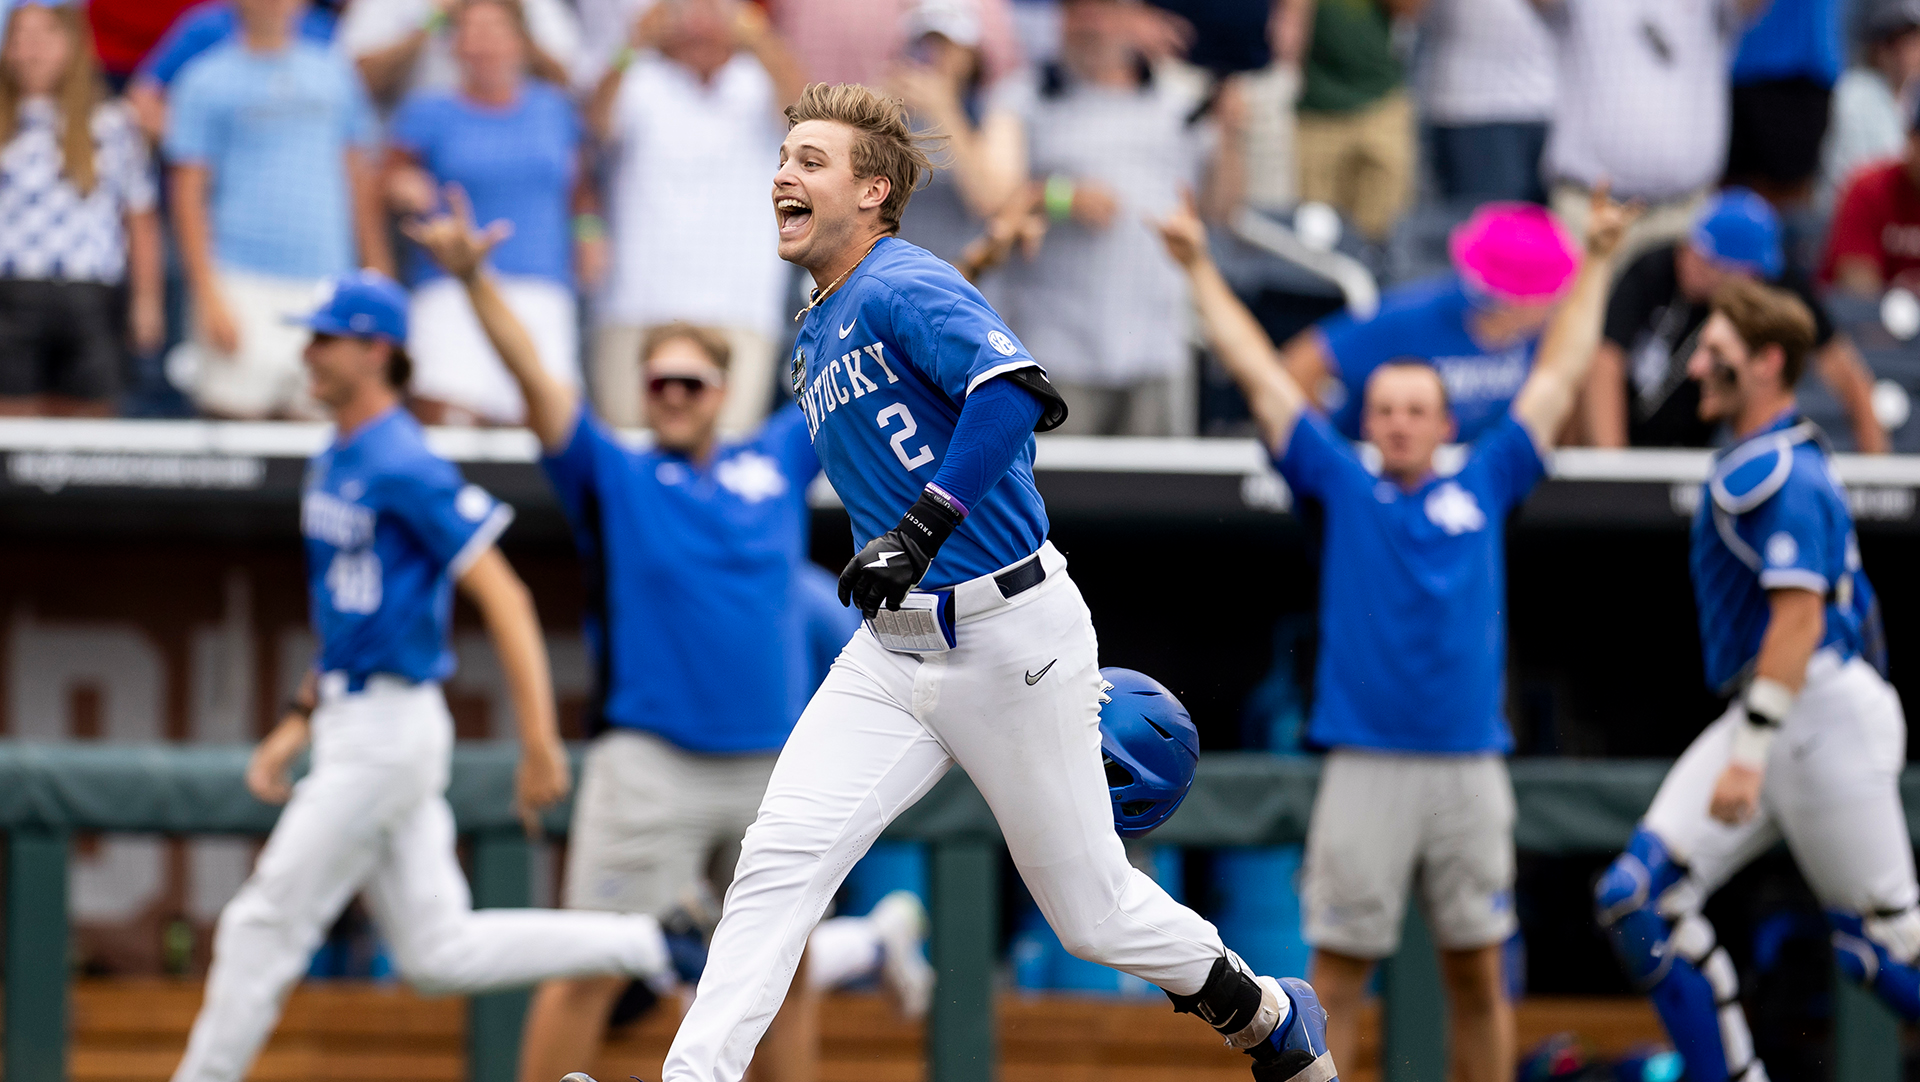 Kentucky Answers Call on College Baseball's Biggest Stage